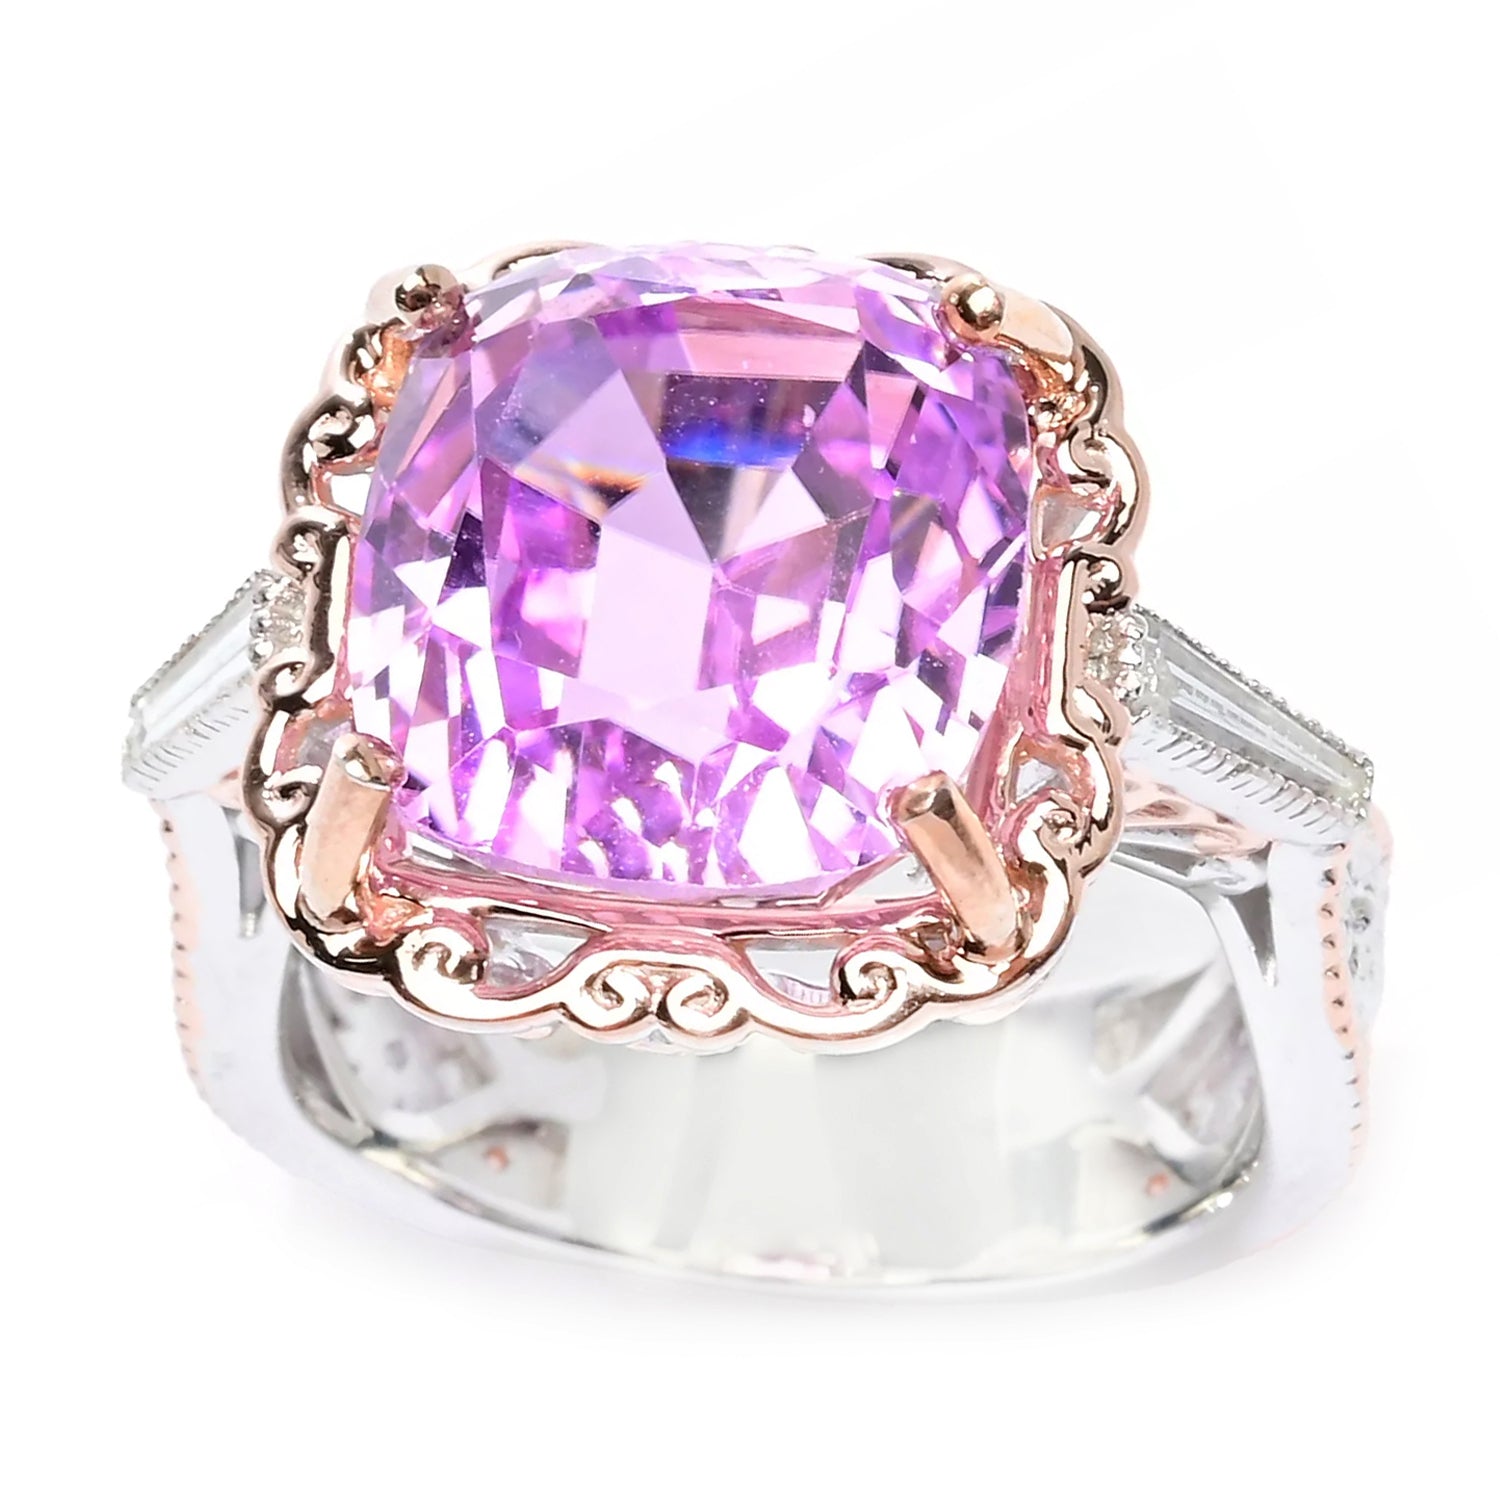 Limited Edition Gems en Vogue Luxe One-of-a-Kind 11.15ctw Kunzite & Diamond Ring